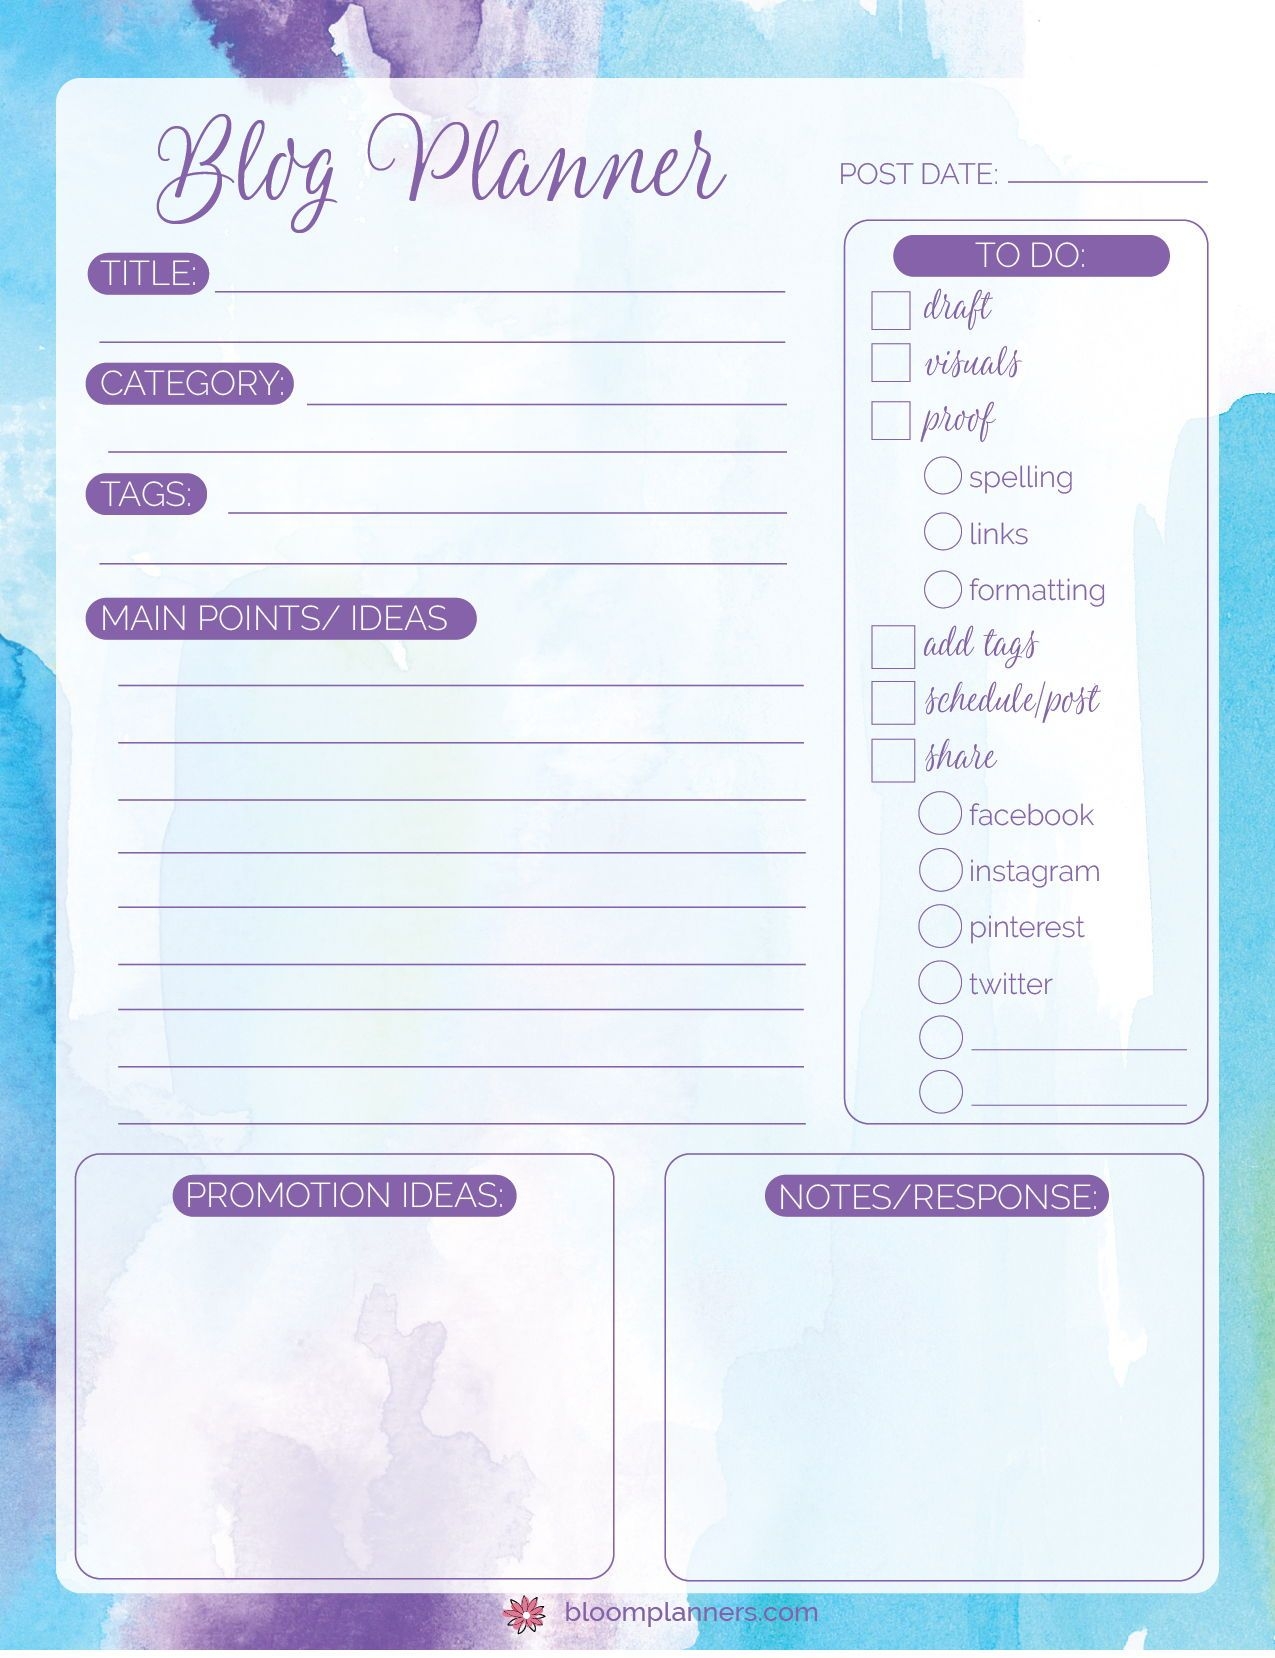 Printables Bloom Daily Planners Planner Printables Free Blog Printables Free Printables